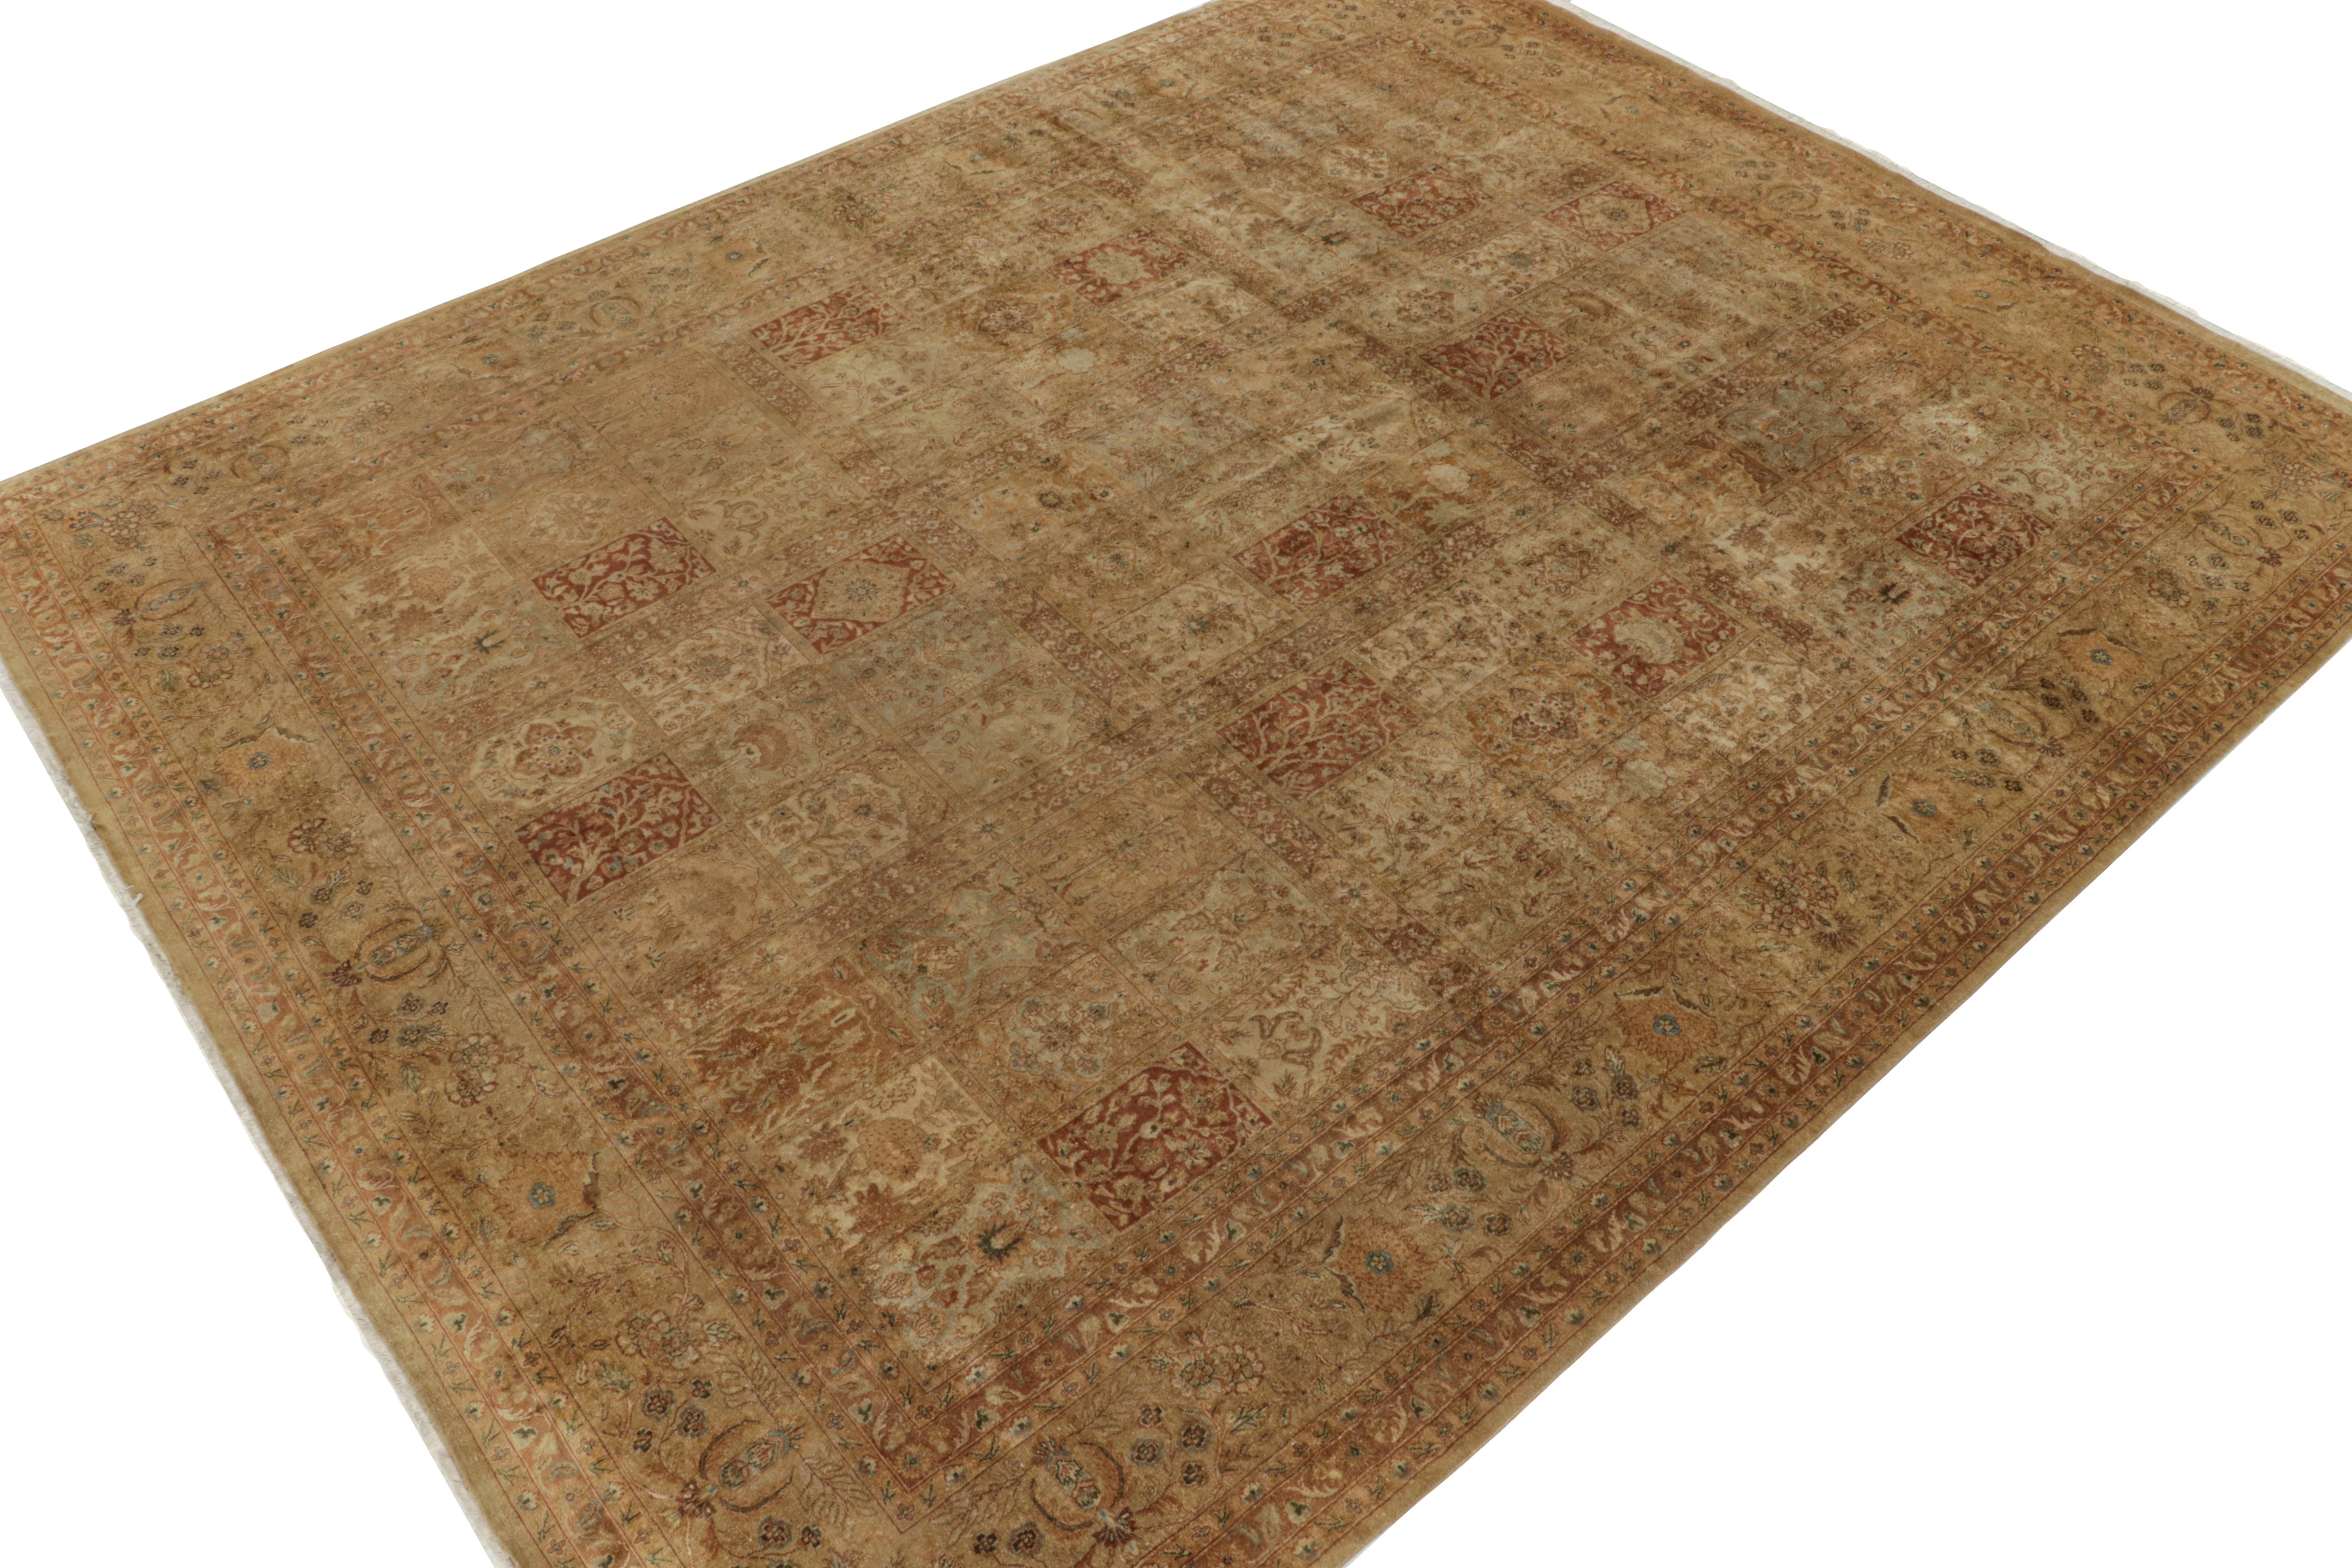 Hand-knotted in wool, this 12x15 contemporary rug from our Modern Classics collection pays homage to antique Persian rug styles.

On the Design: A gracious large scale hosts gorgeous florals in rich beige-brown and red with gold and blue accents.